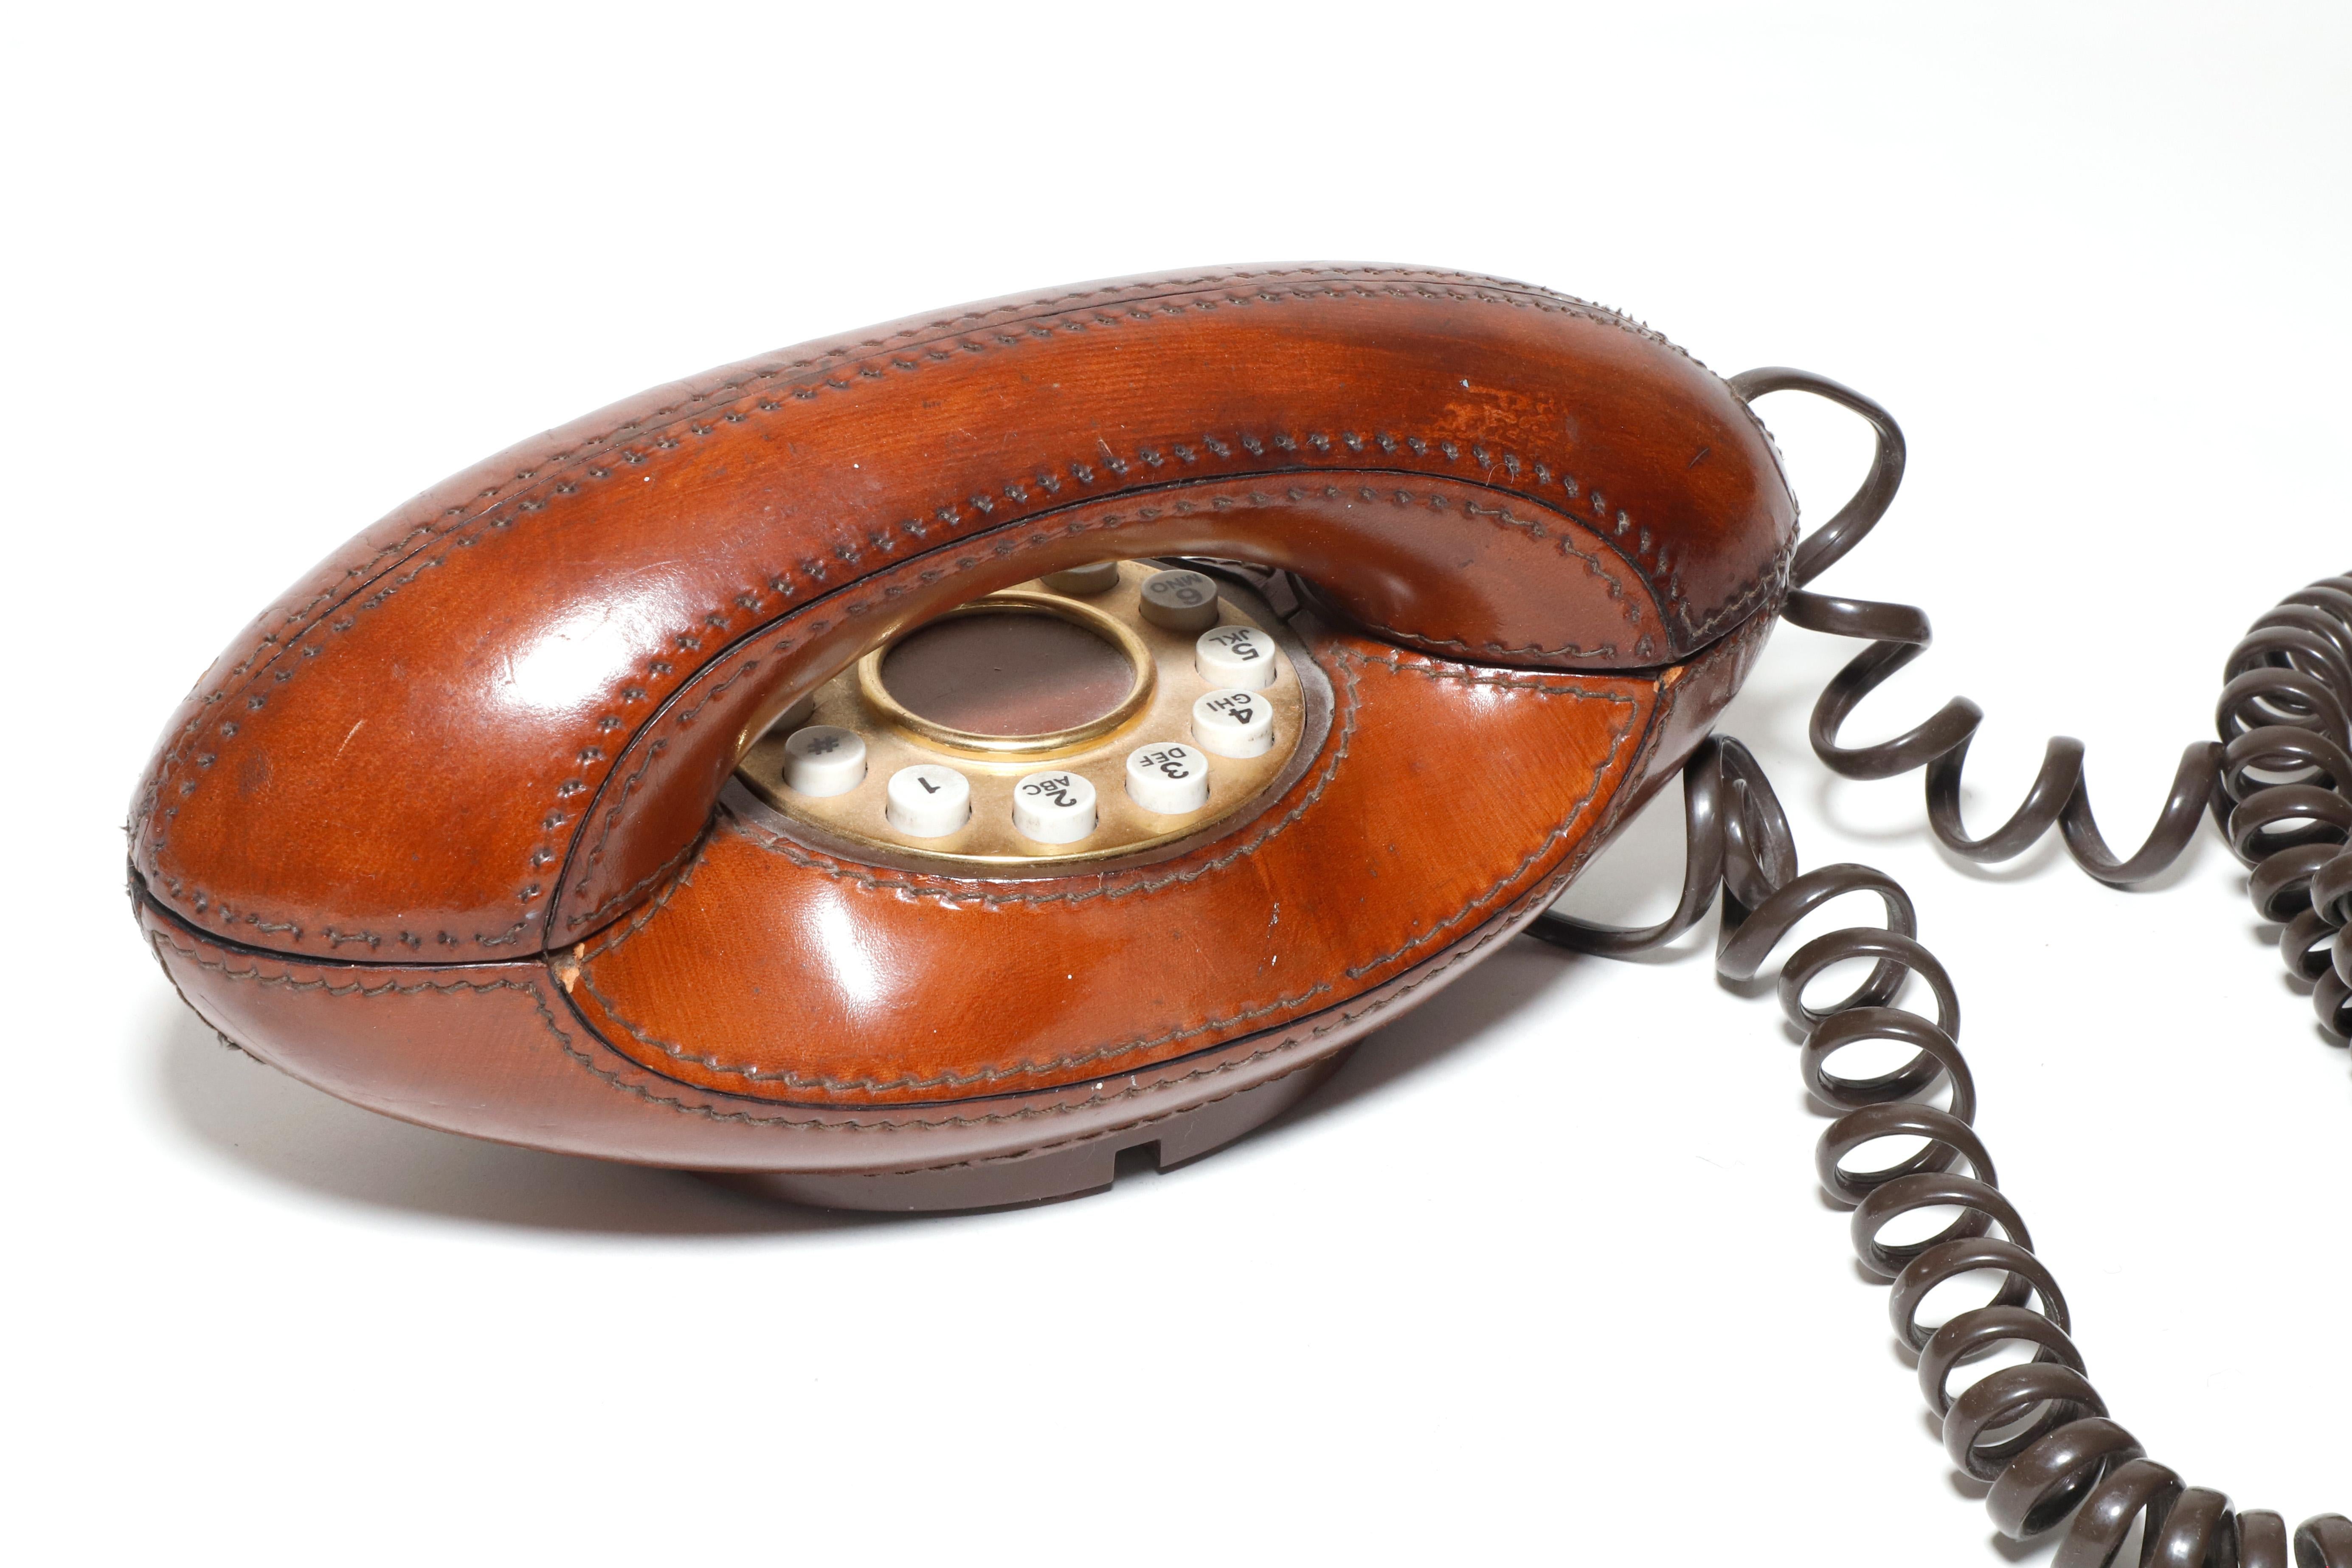 Beautiful vintage brown leather covered telephone with intricate stitching and brass plate around the push buttons. Made by Genie and designed in the late-1970s in the USA. This model was of great popularity during the time. Working piece.